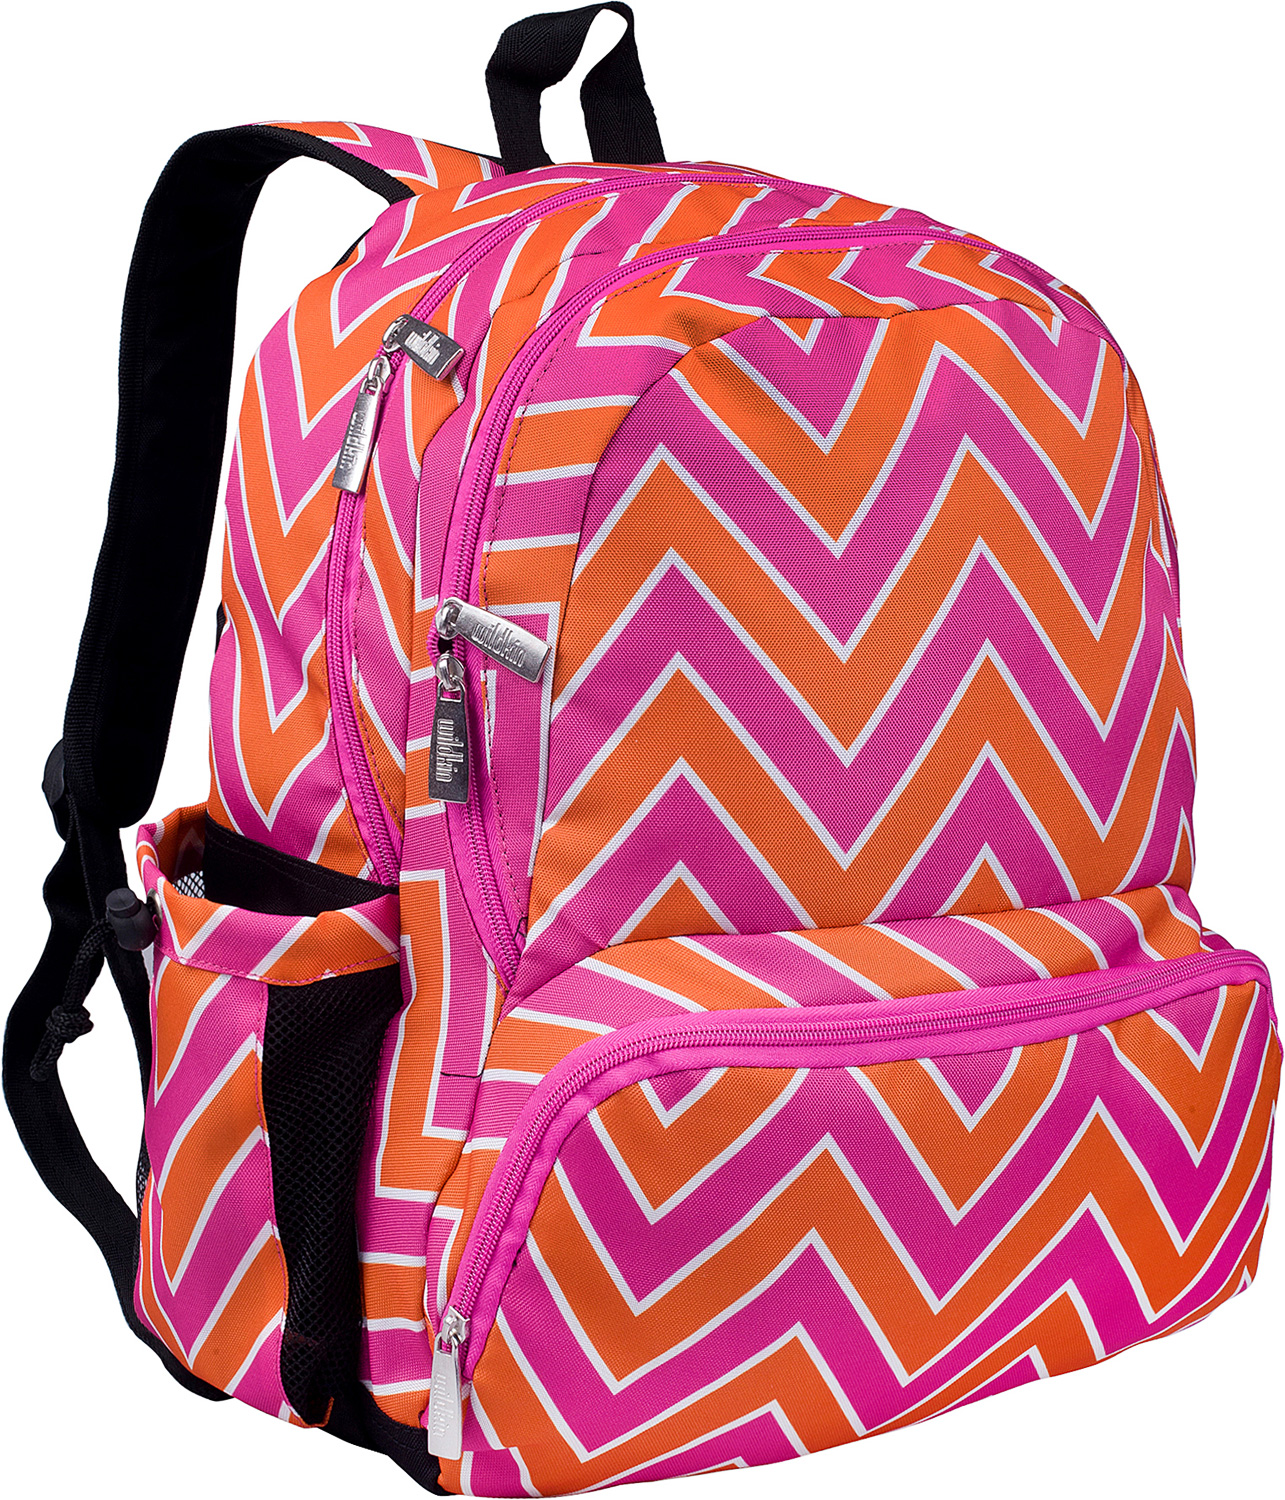 Wildkin Zigzag Pink 17 Inch Backpack - Toys To Love